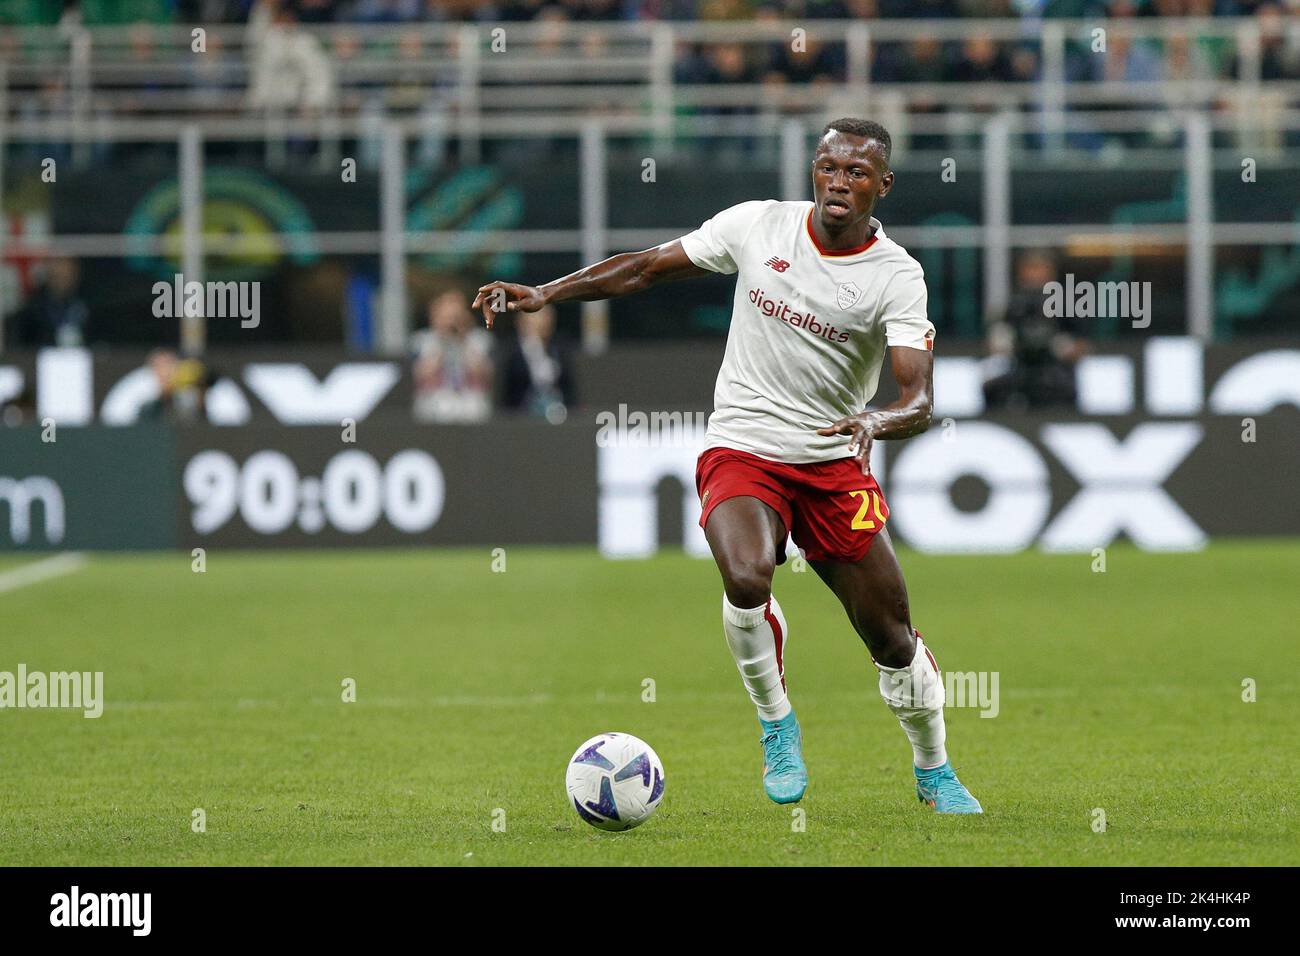 Milan, Italy. 01st Oct, 2022. Italy, Milan, oct 1 2022: Mady Camara (Roma midfielder) drives to the penalty area in the second half during soccer game FC INTER vs AS ROMA, Serie A Tim 2022-2023 day8 San Siro stadium (Photo by Fabrizio Andrea Bertani/Pacific Press) Credit: Pacific Press Media Production Corp./Alamy Live News Stock Photo